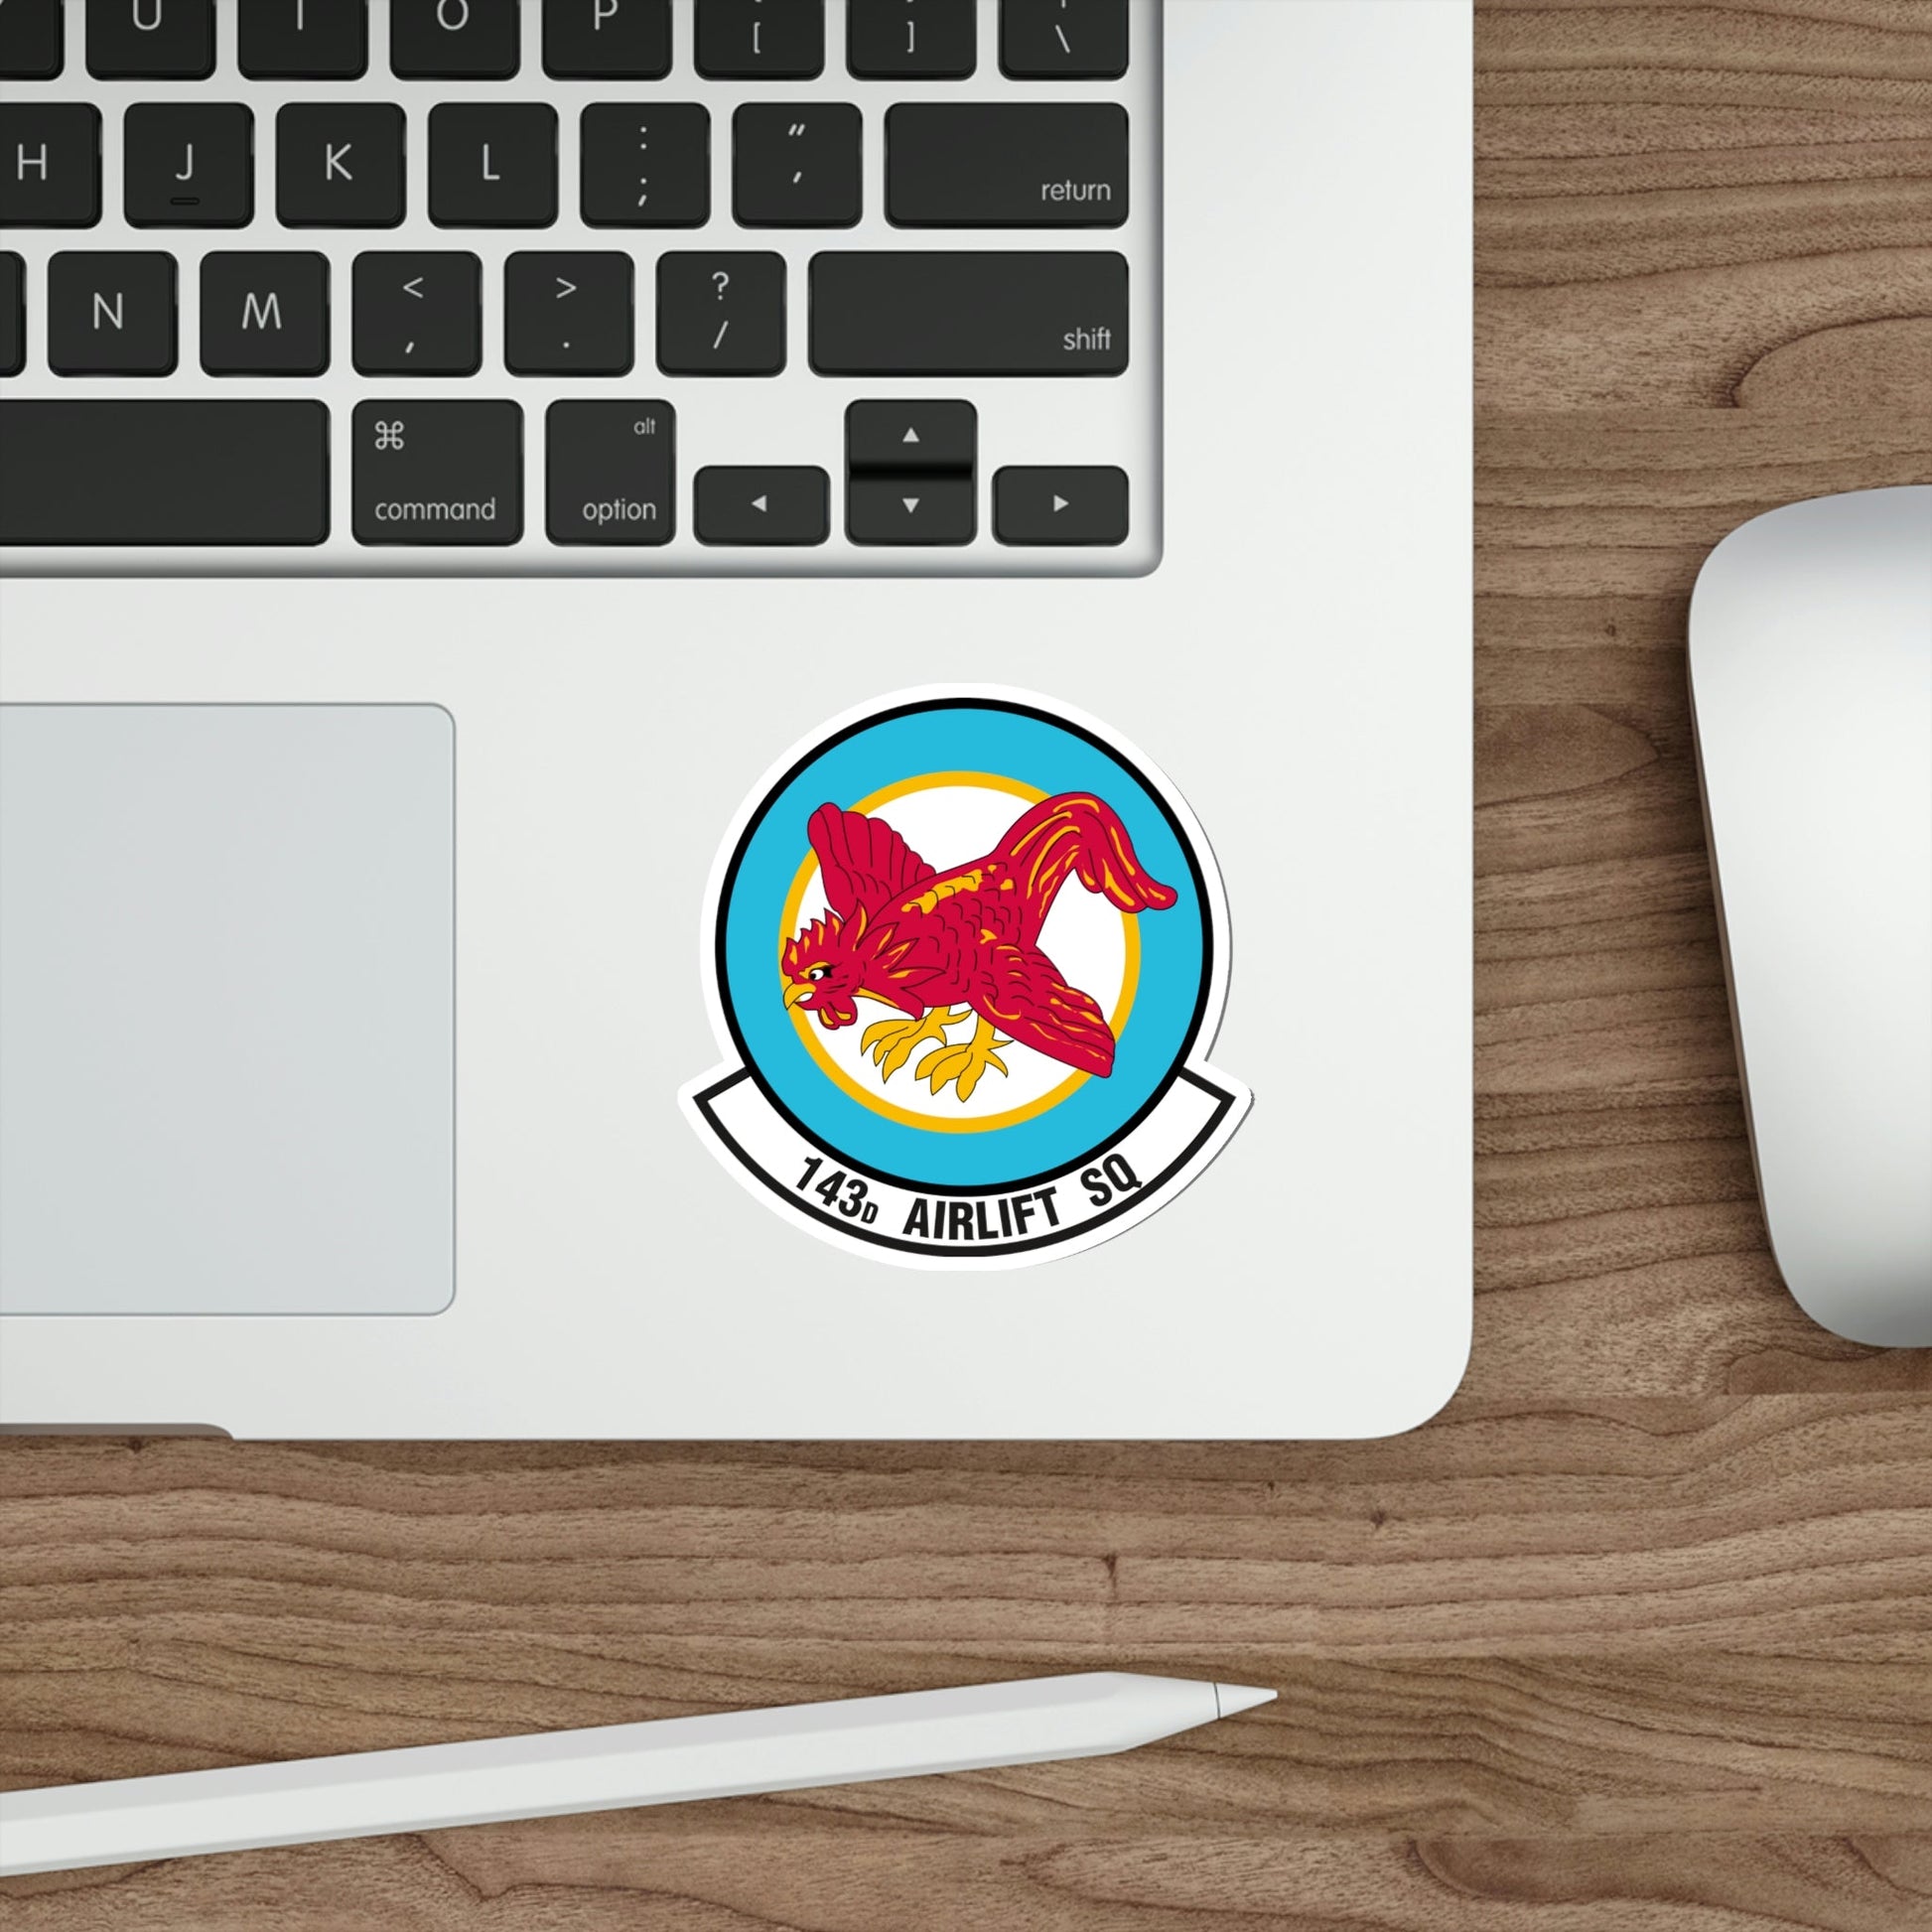 143 Airlift Squadron (U.S. Air Force) STICKER Vinyl Die-Cut Decal-The Sticker Space